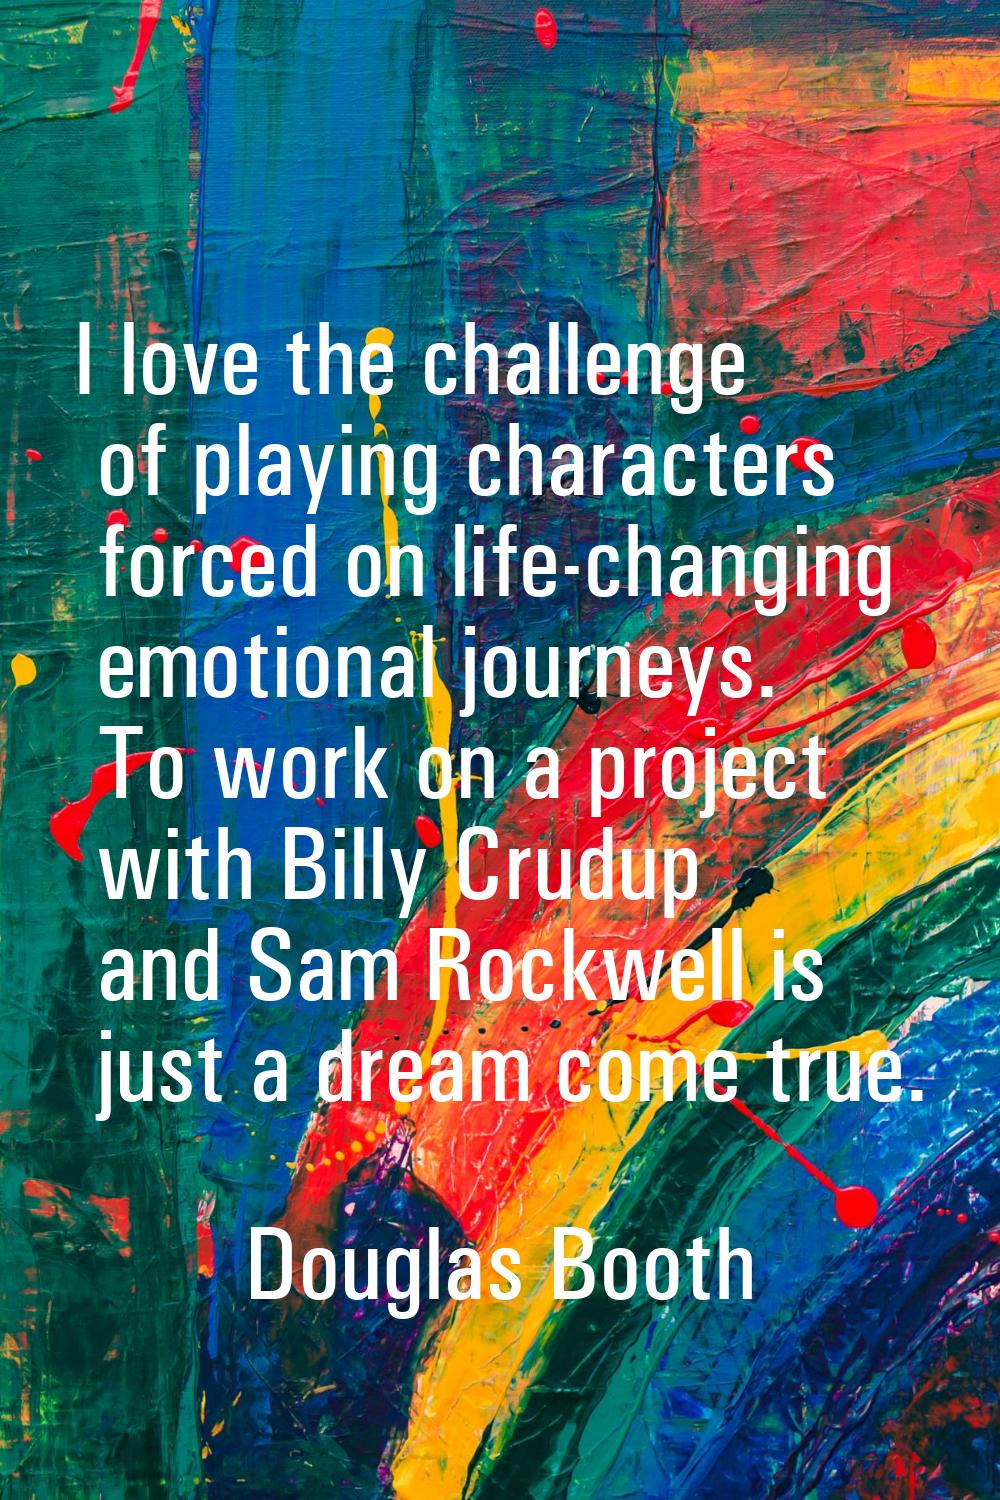 I love the challenge of playing characters forced on life-changing emotional journeys. To work on a